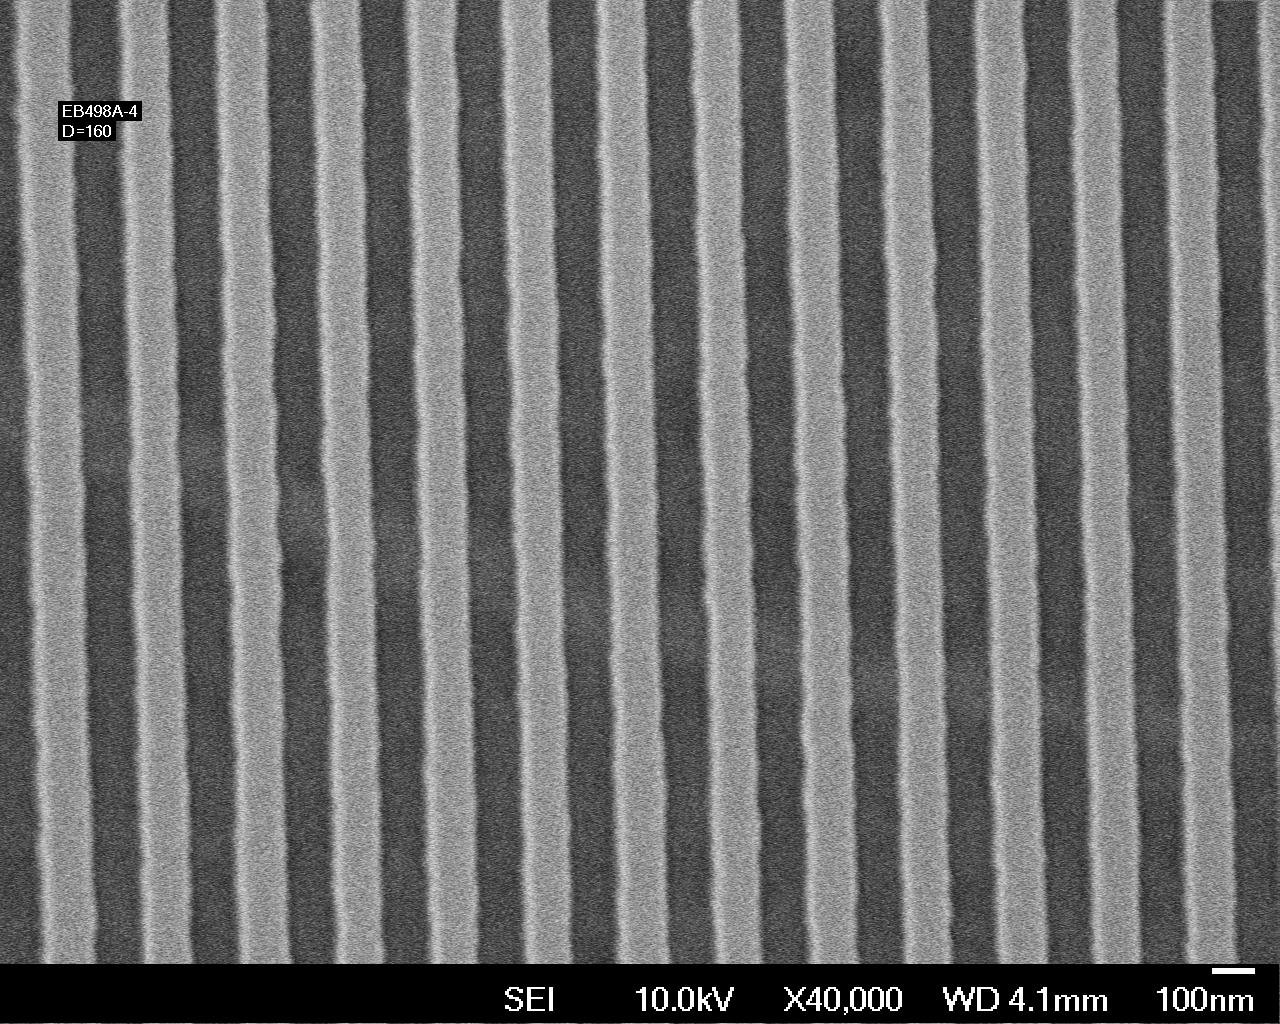 sem image with grating of lines